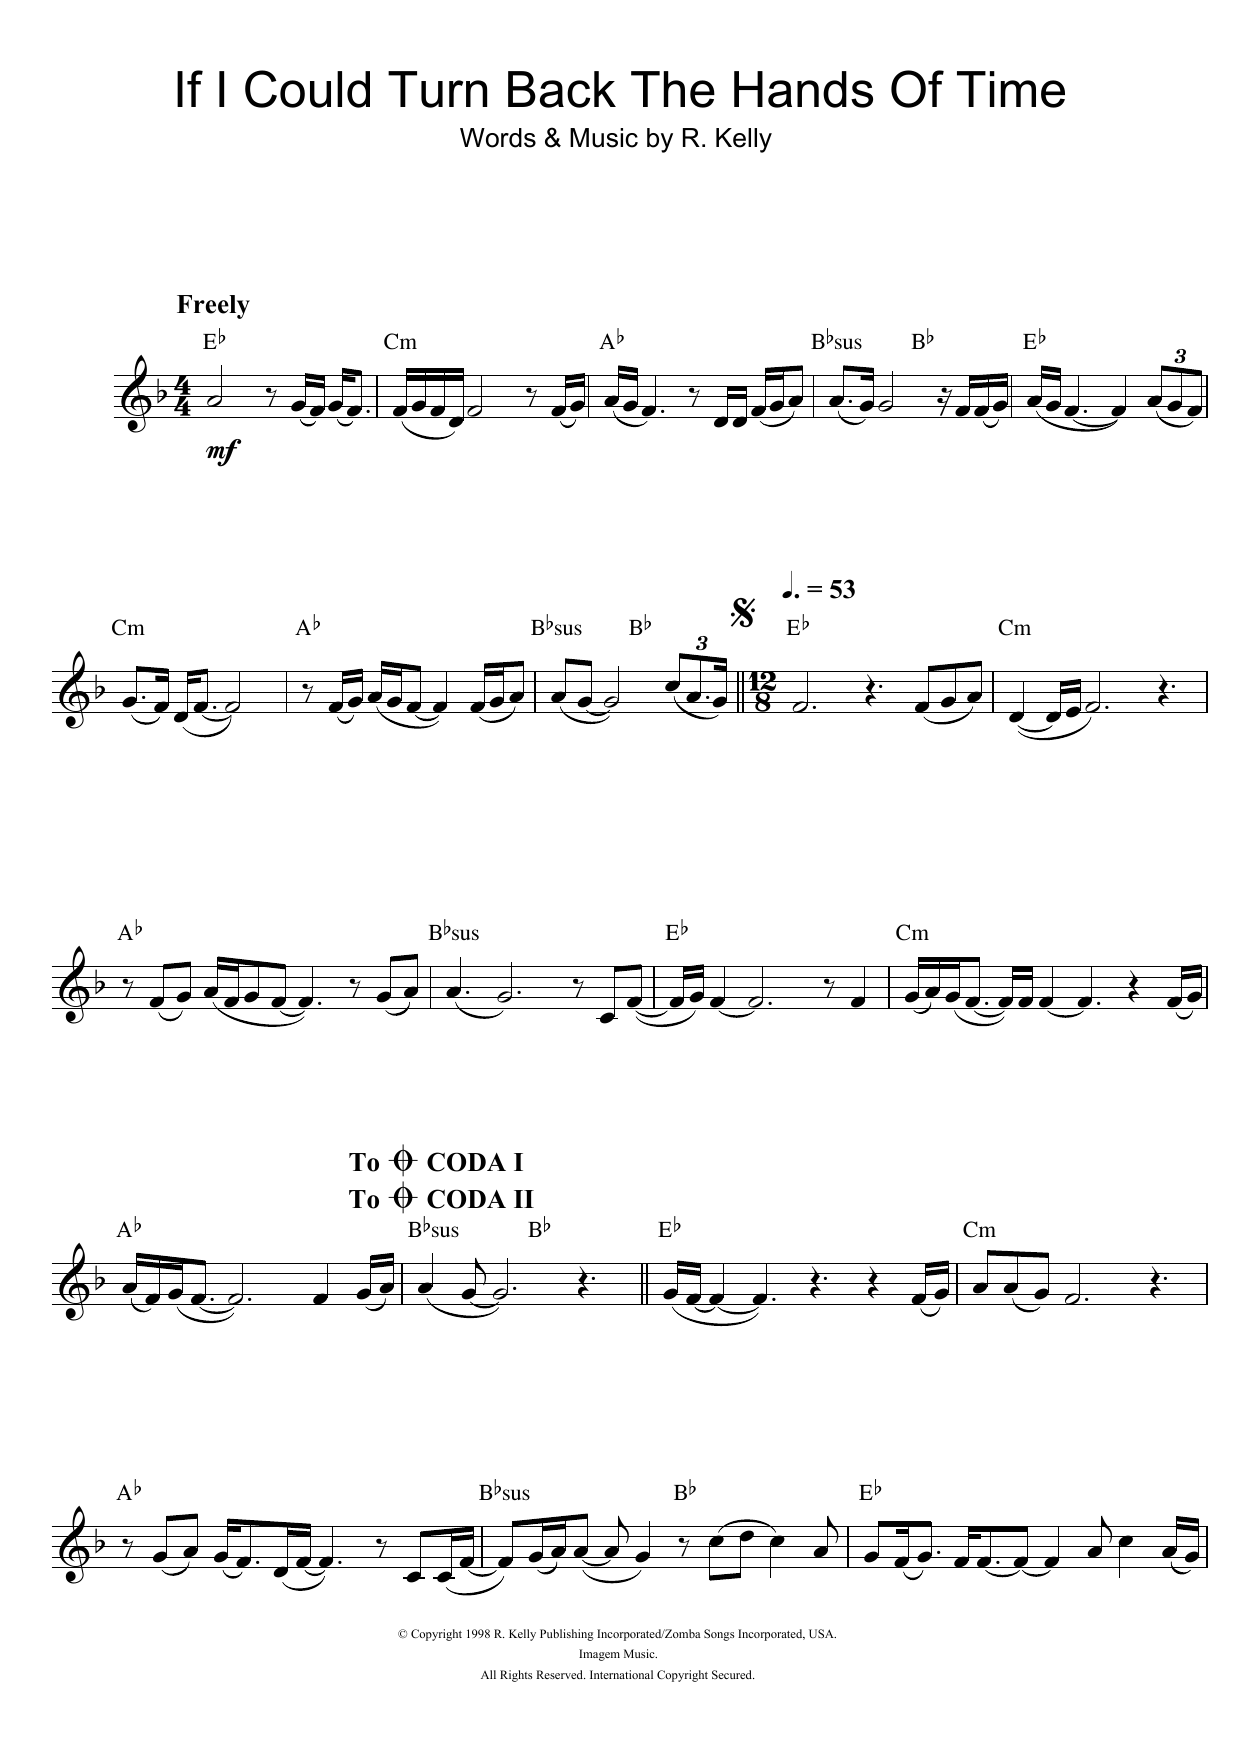 Download R. Kelly If I Could Turn Back The Hands Of Time Sheet Music